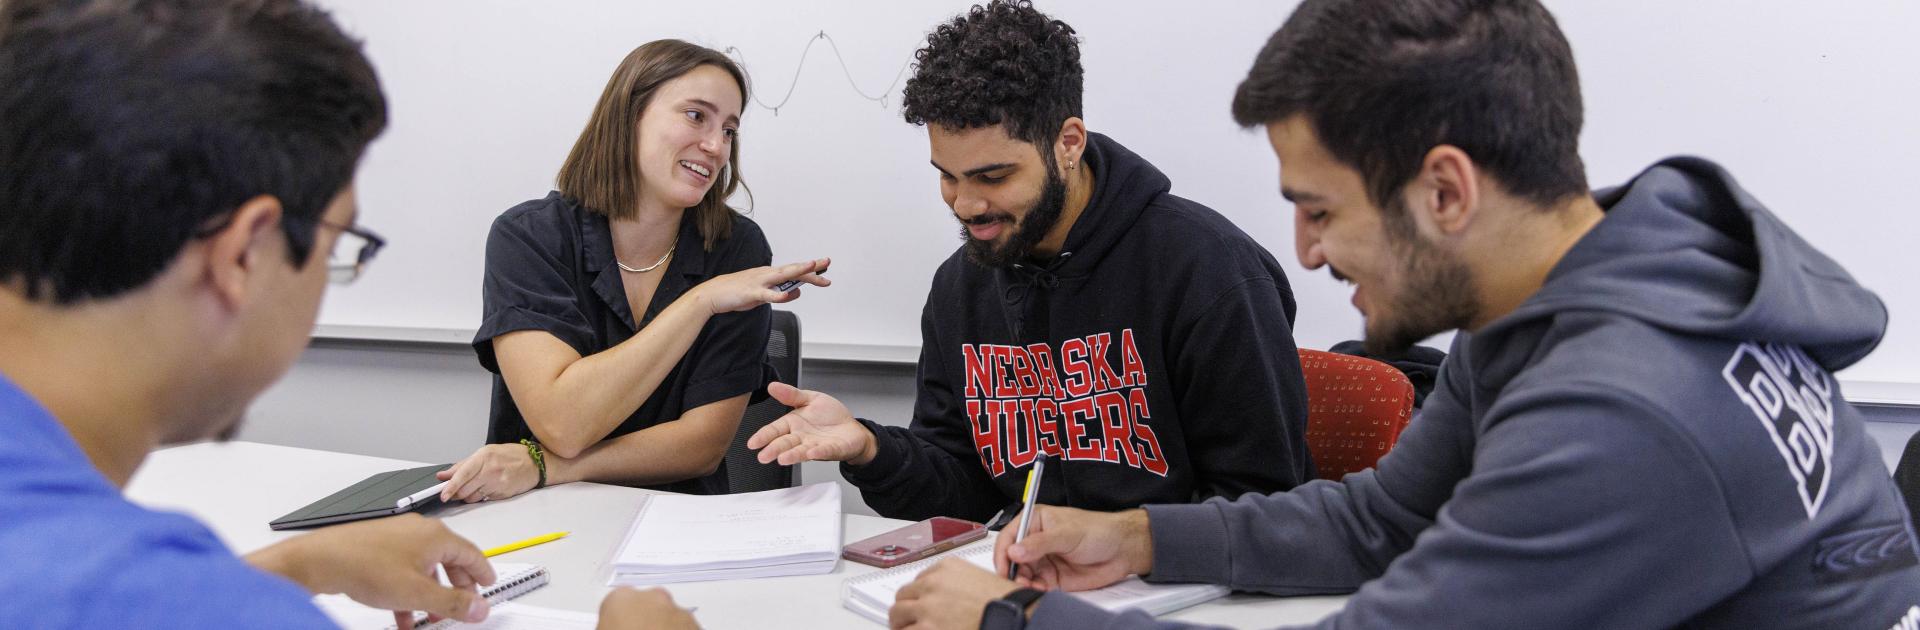 Isabel Safarik teaches Math 106 and helps students with homework problems